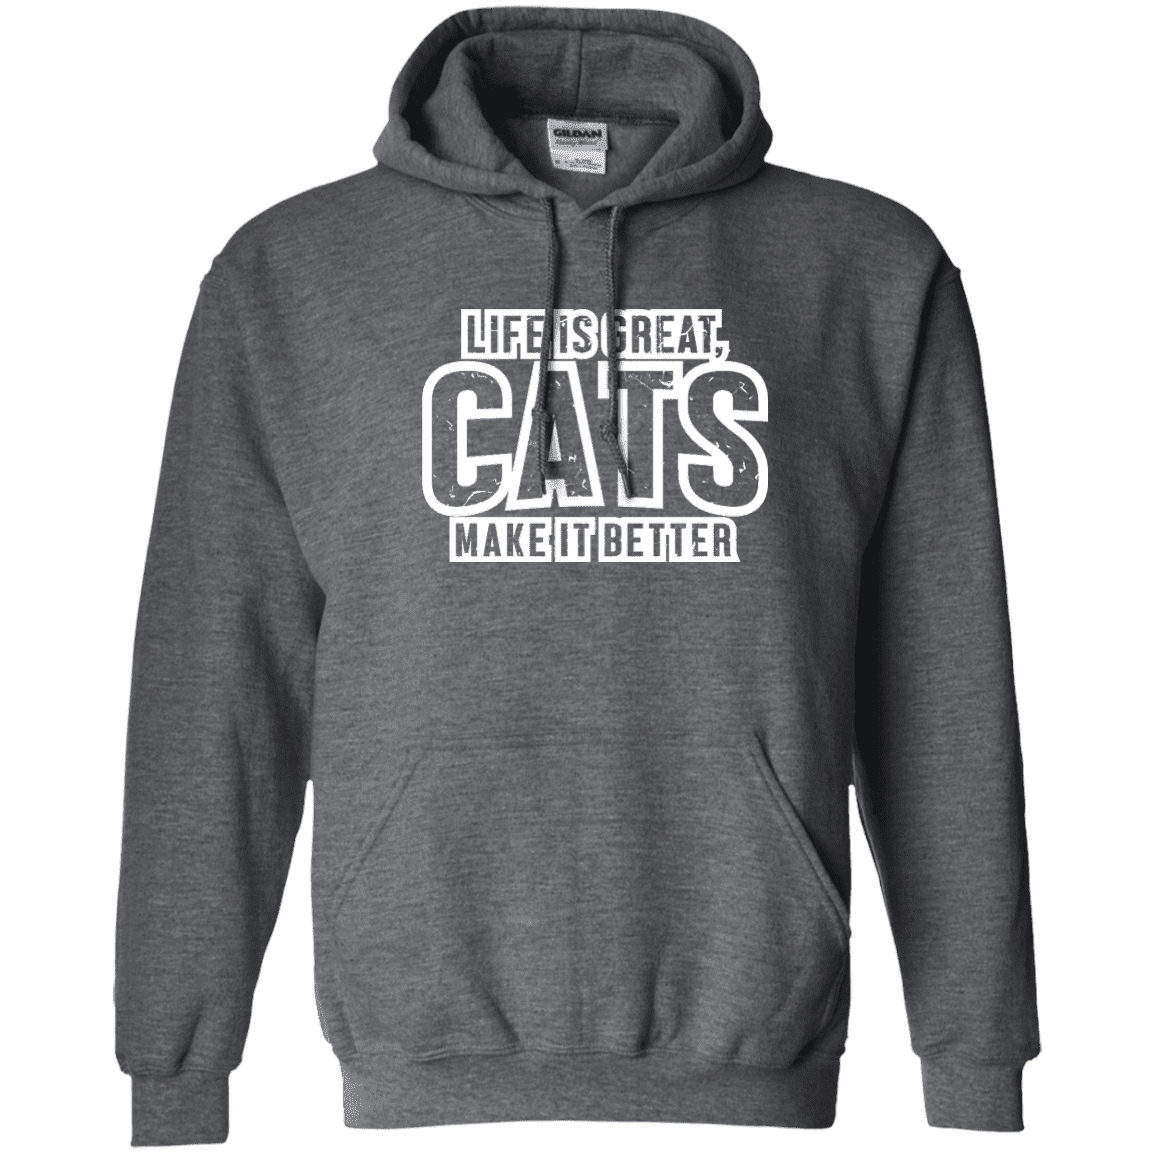 Life Is Great Cats - Hoodie.